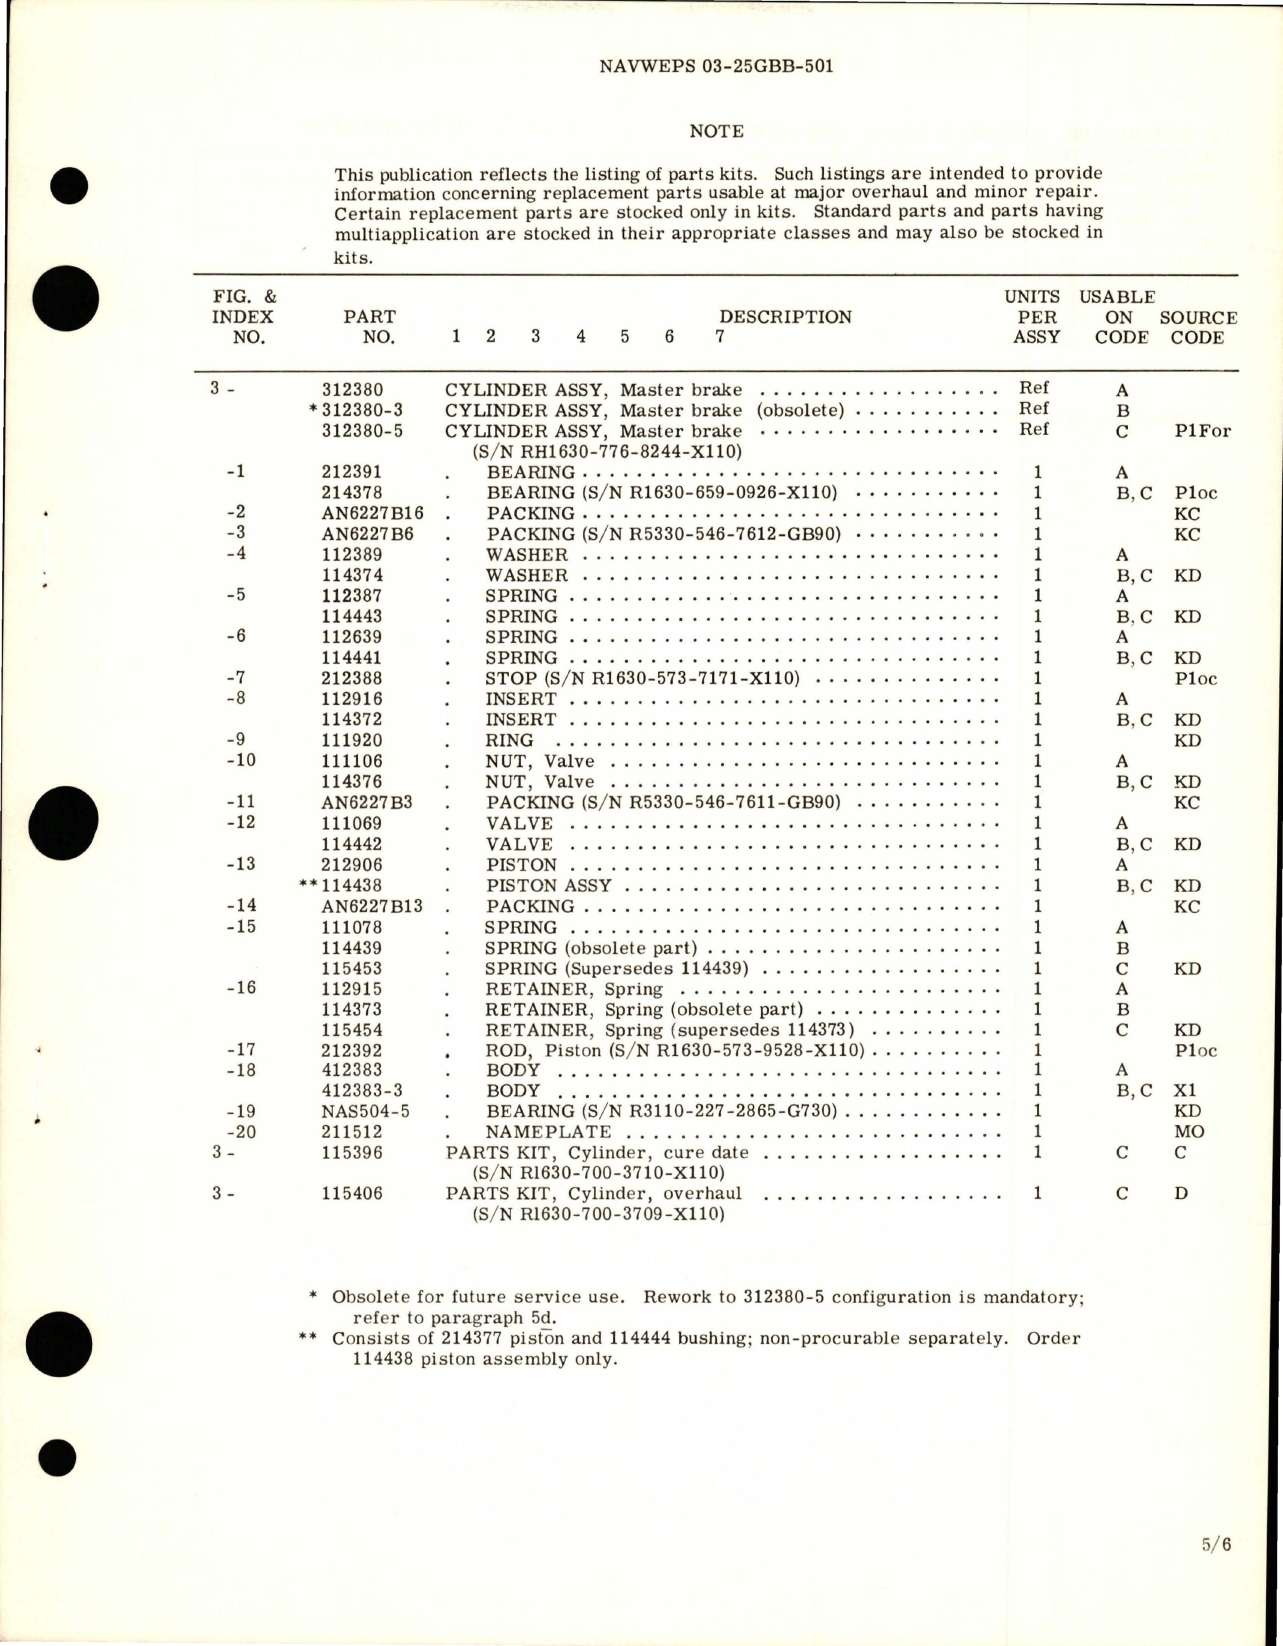 Sample page 5 from AirCorps Library document: Overhaul Instructions with Parts Breakdown for Master Brake Cylinders - Parts 312380, 312380-3, and 312380-5 